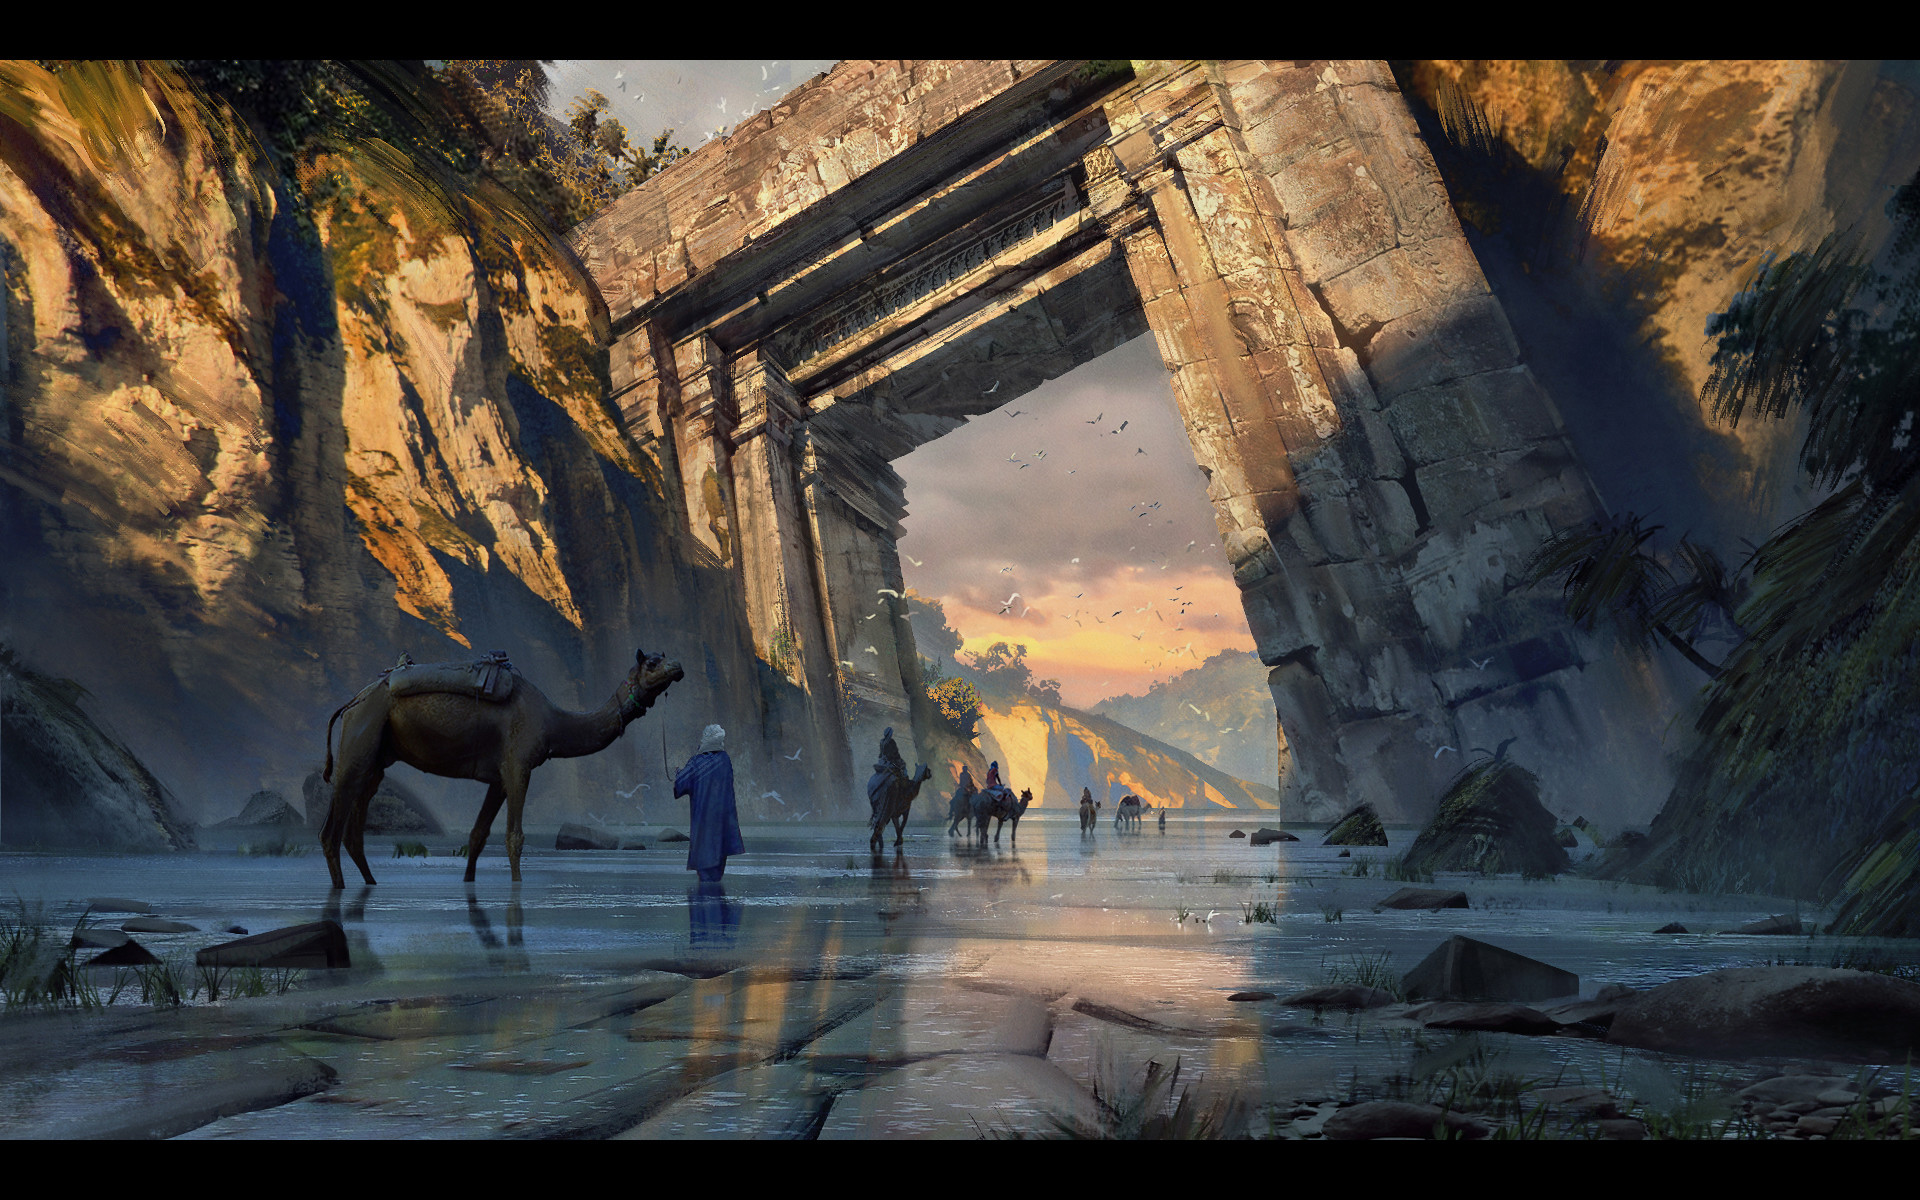 Old Gate by Quentin Mabille